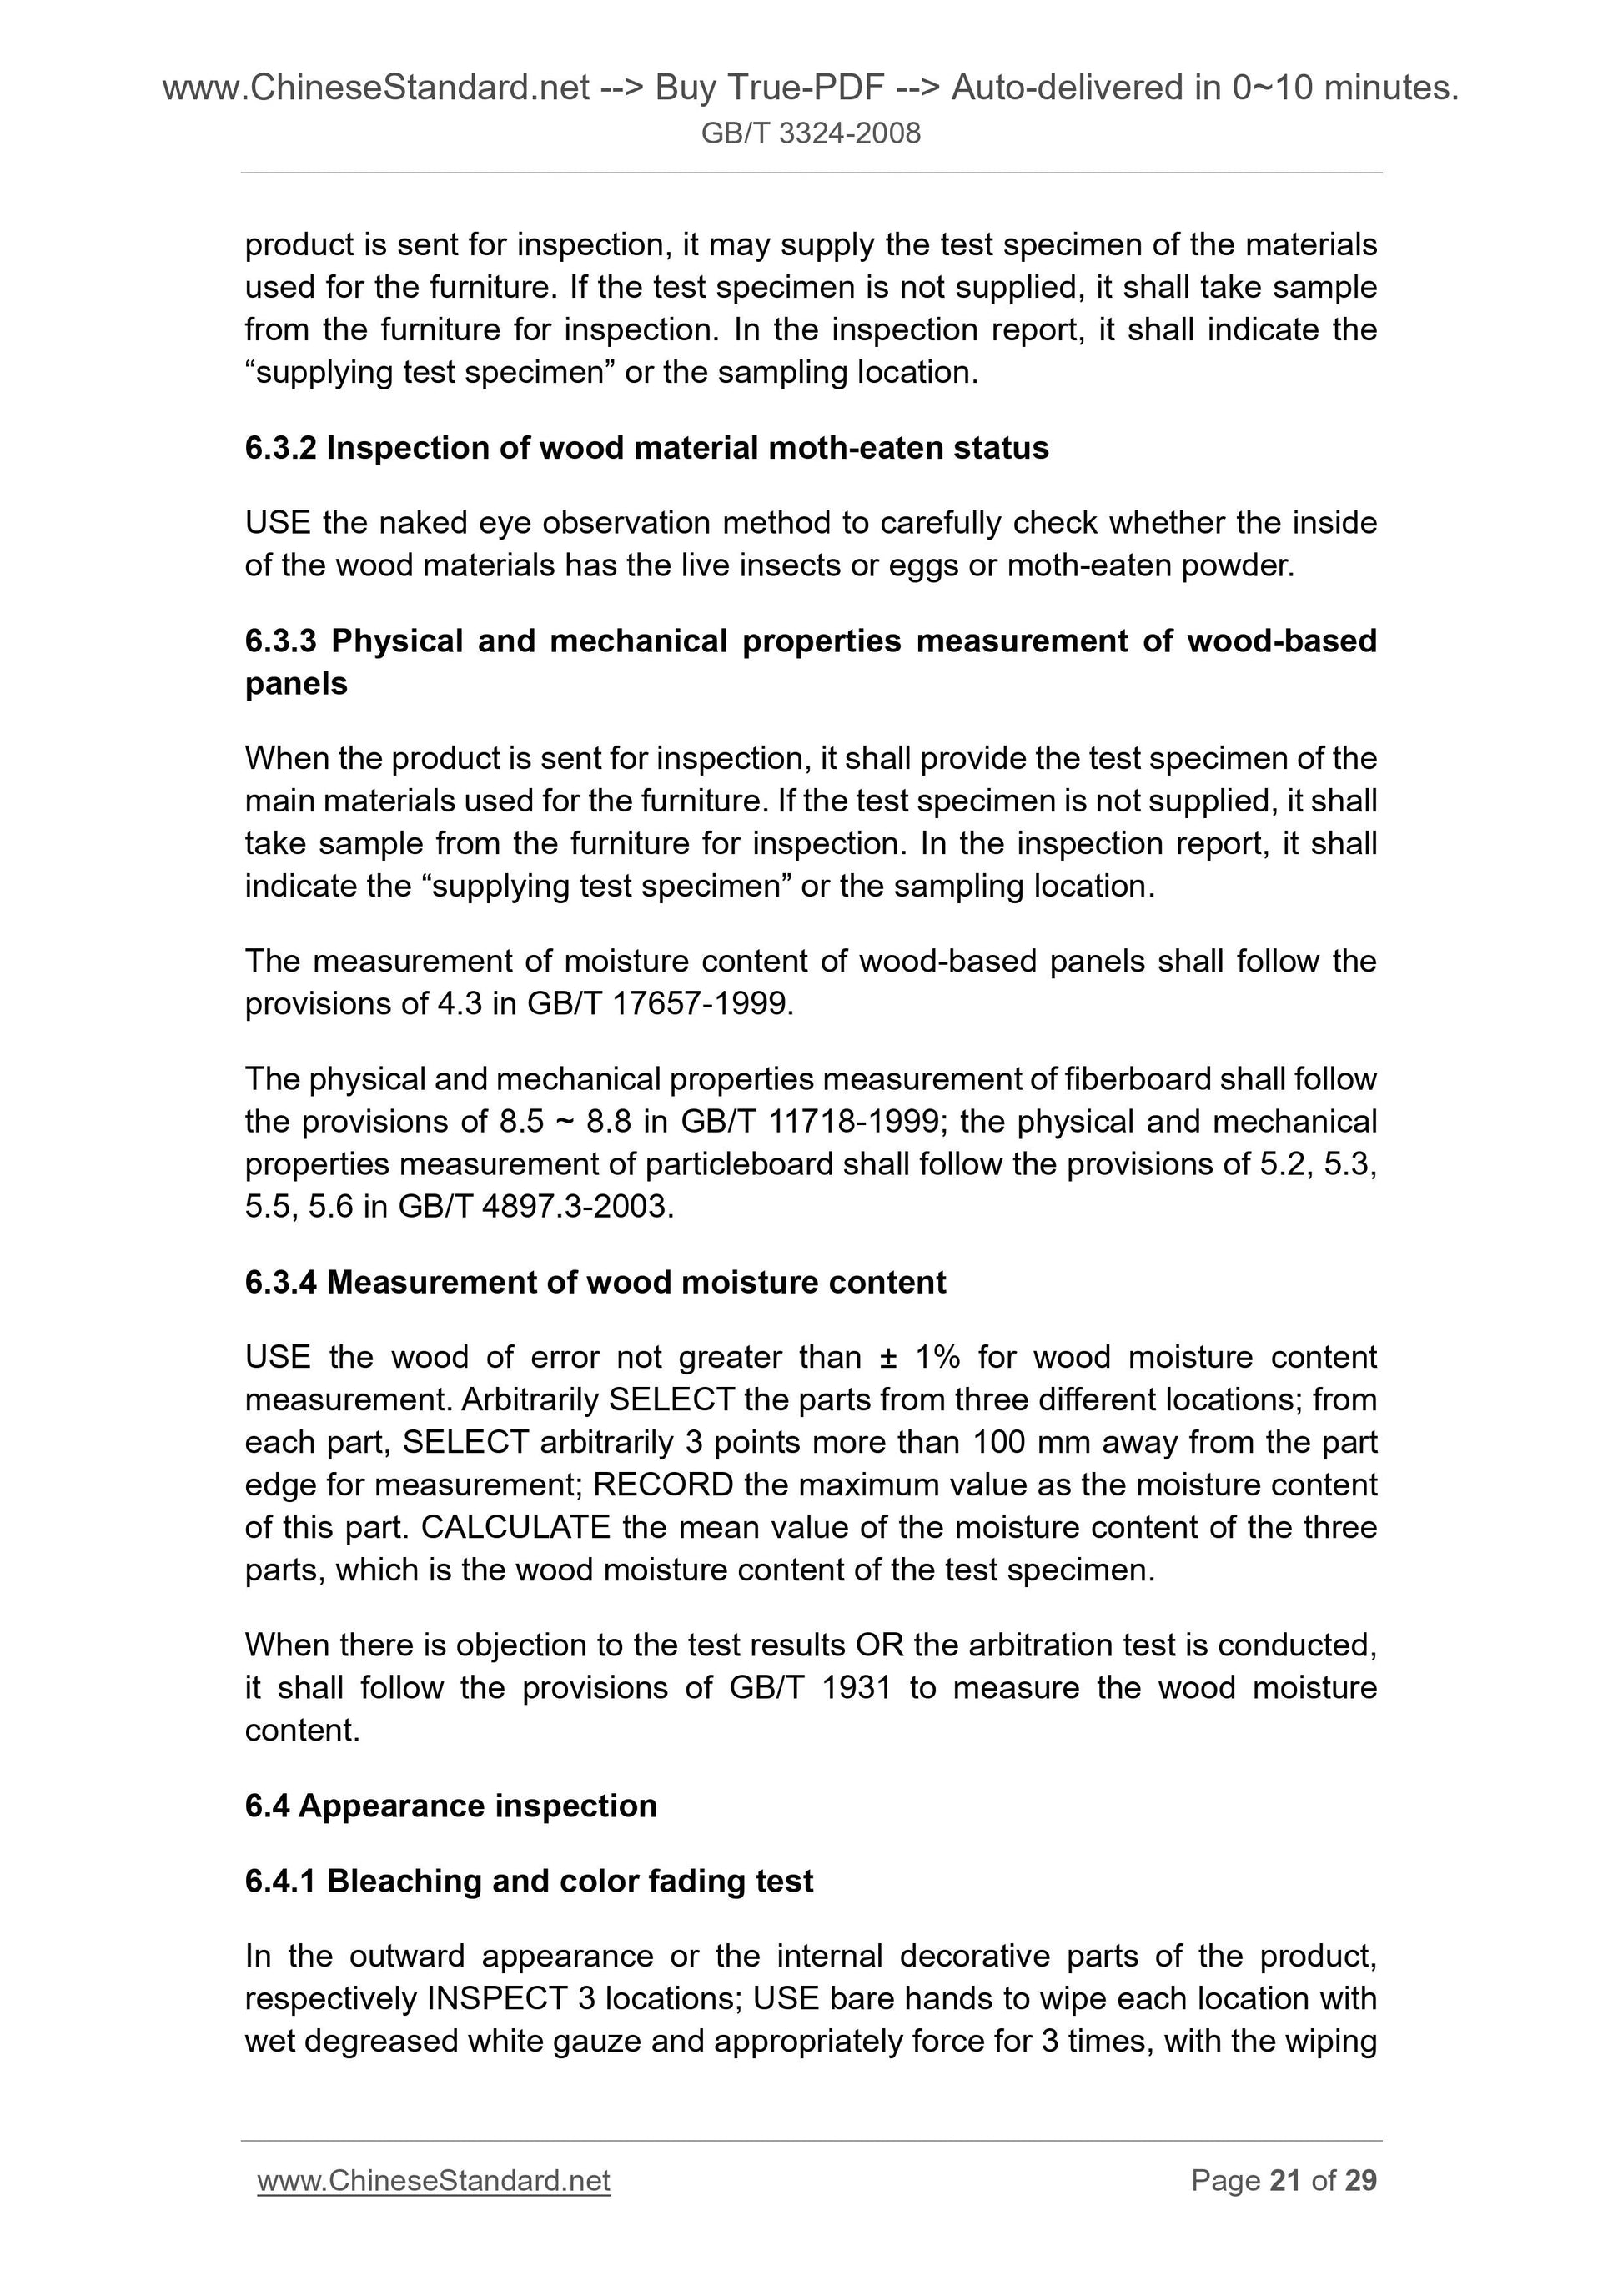 GB/T 3324-2008 Page 11